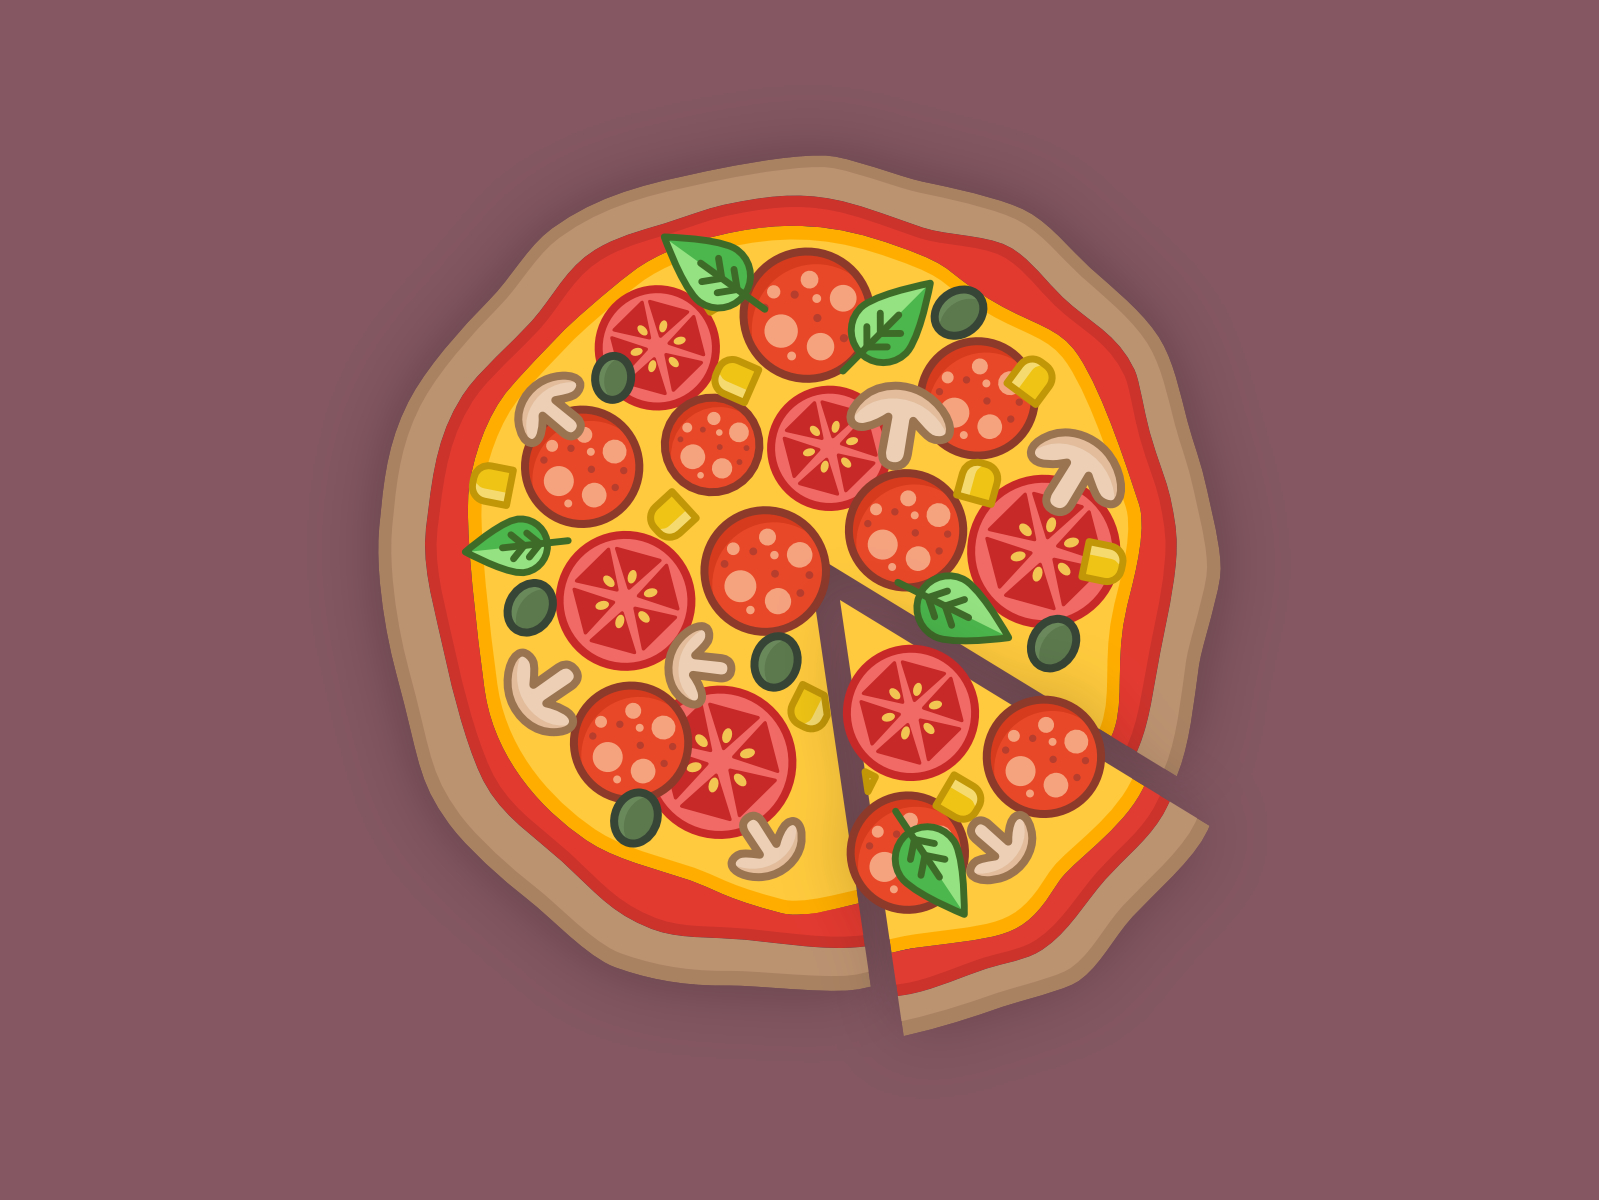 Pizza design | piece | food by Iblowyourdesign on Dribbble